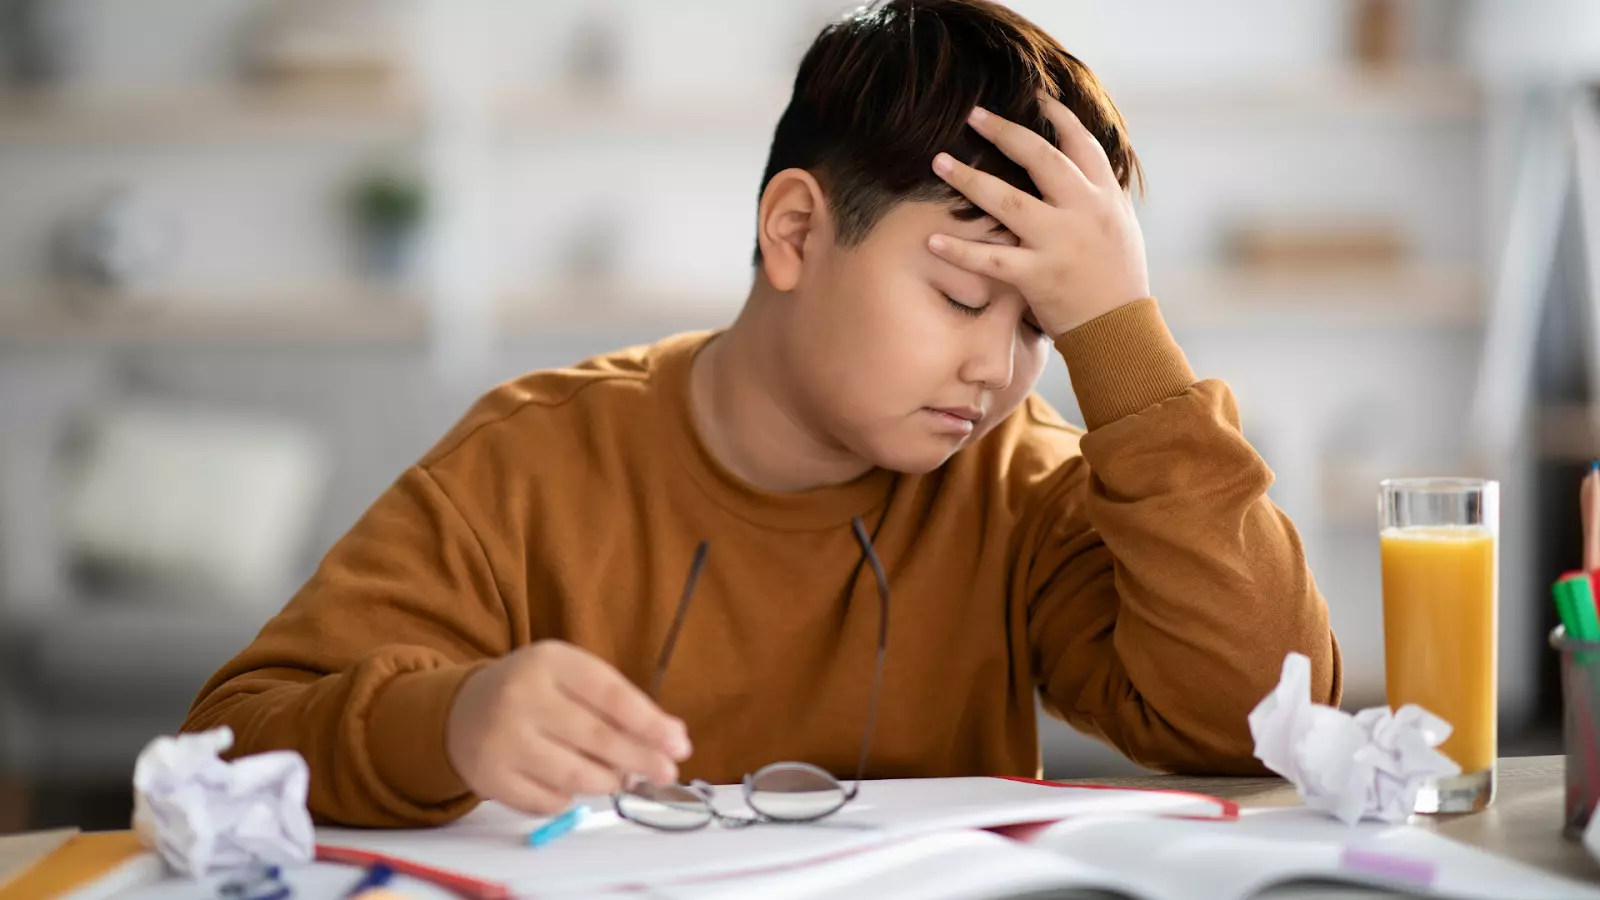 Why Is Homework Hard for Some Kids